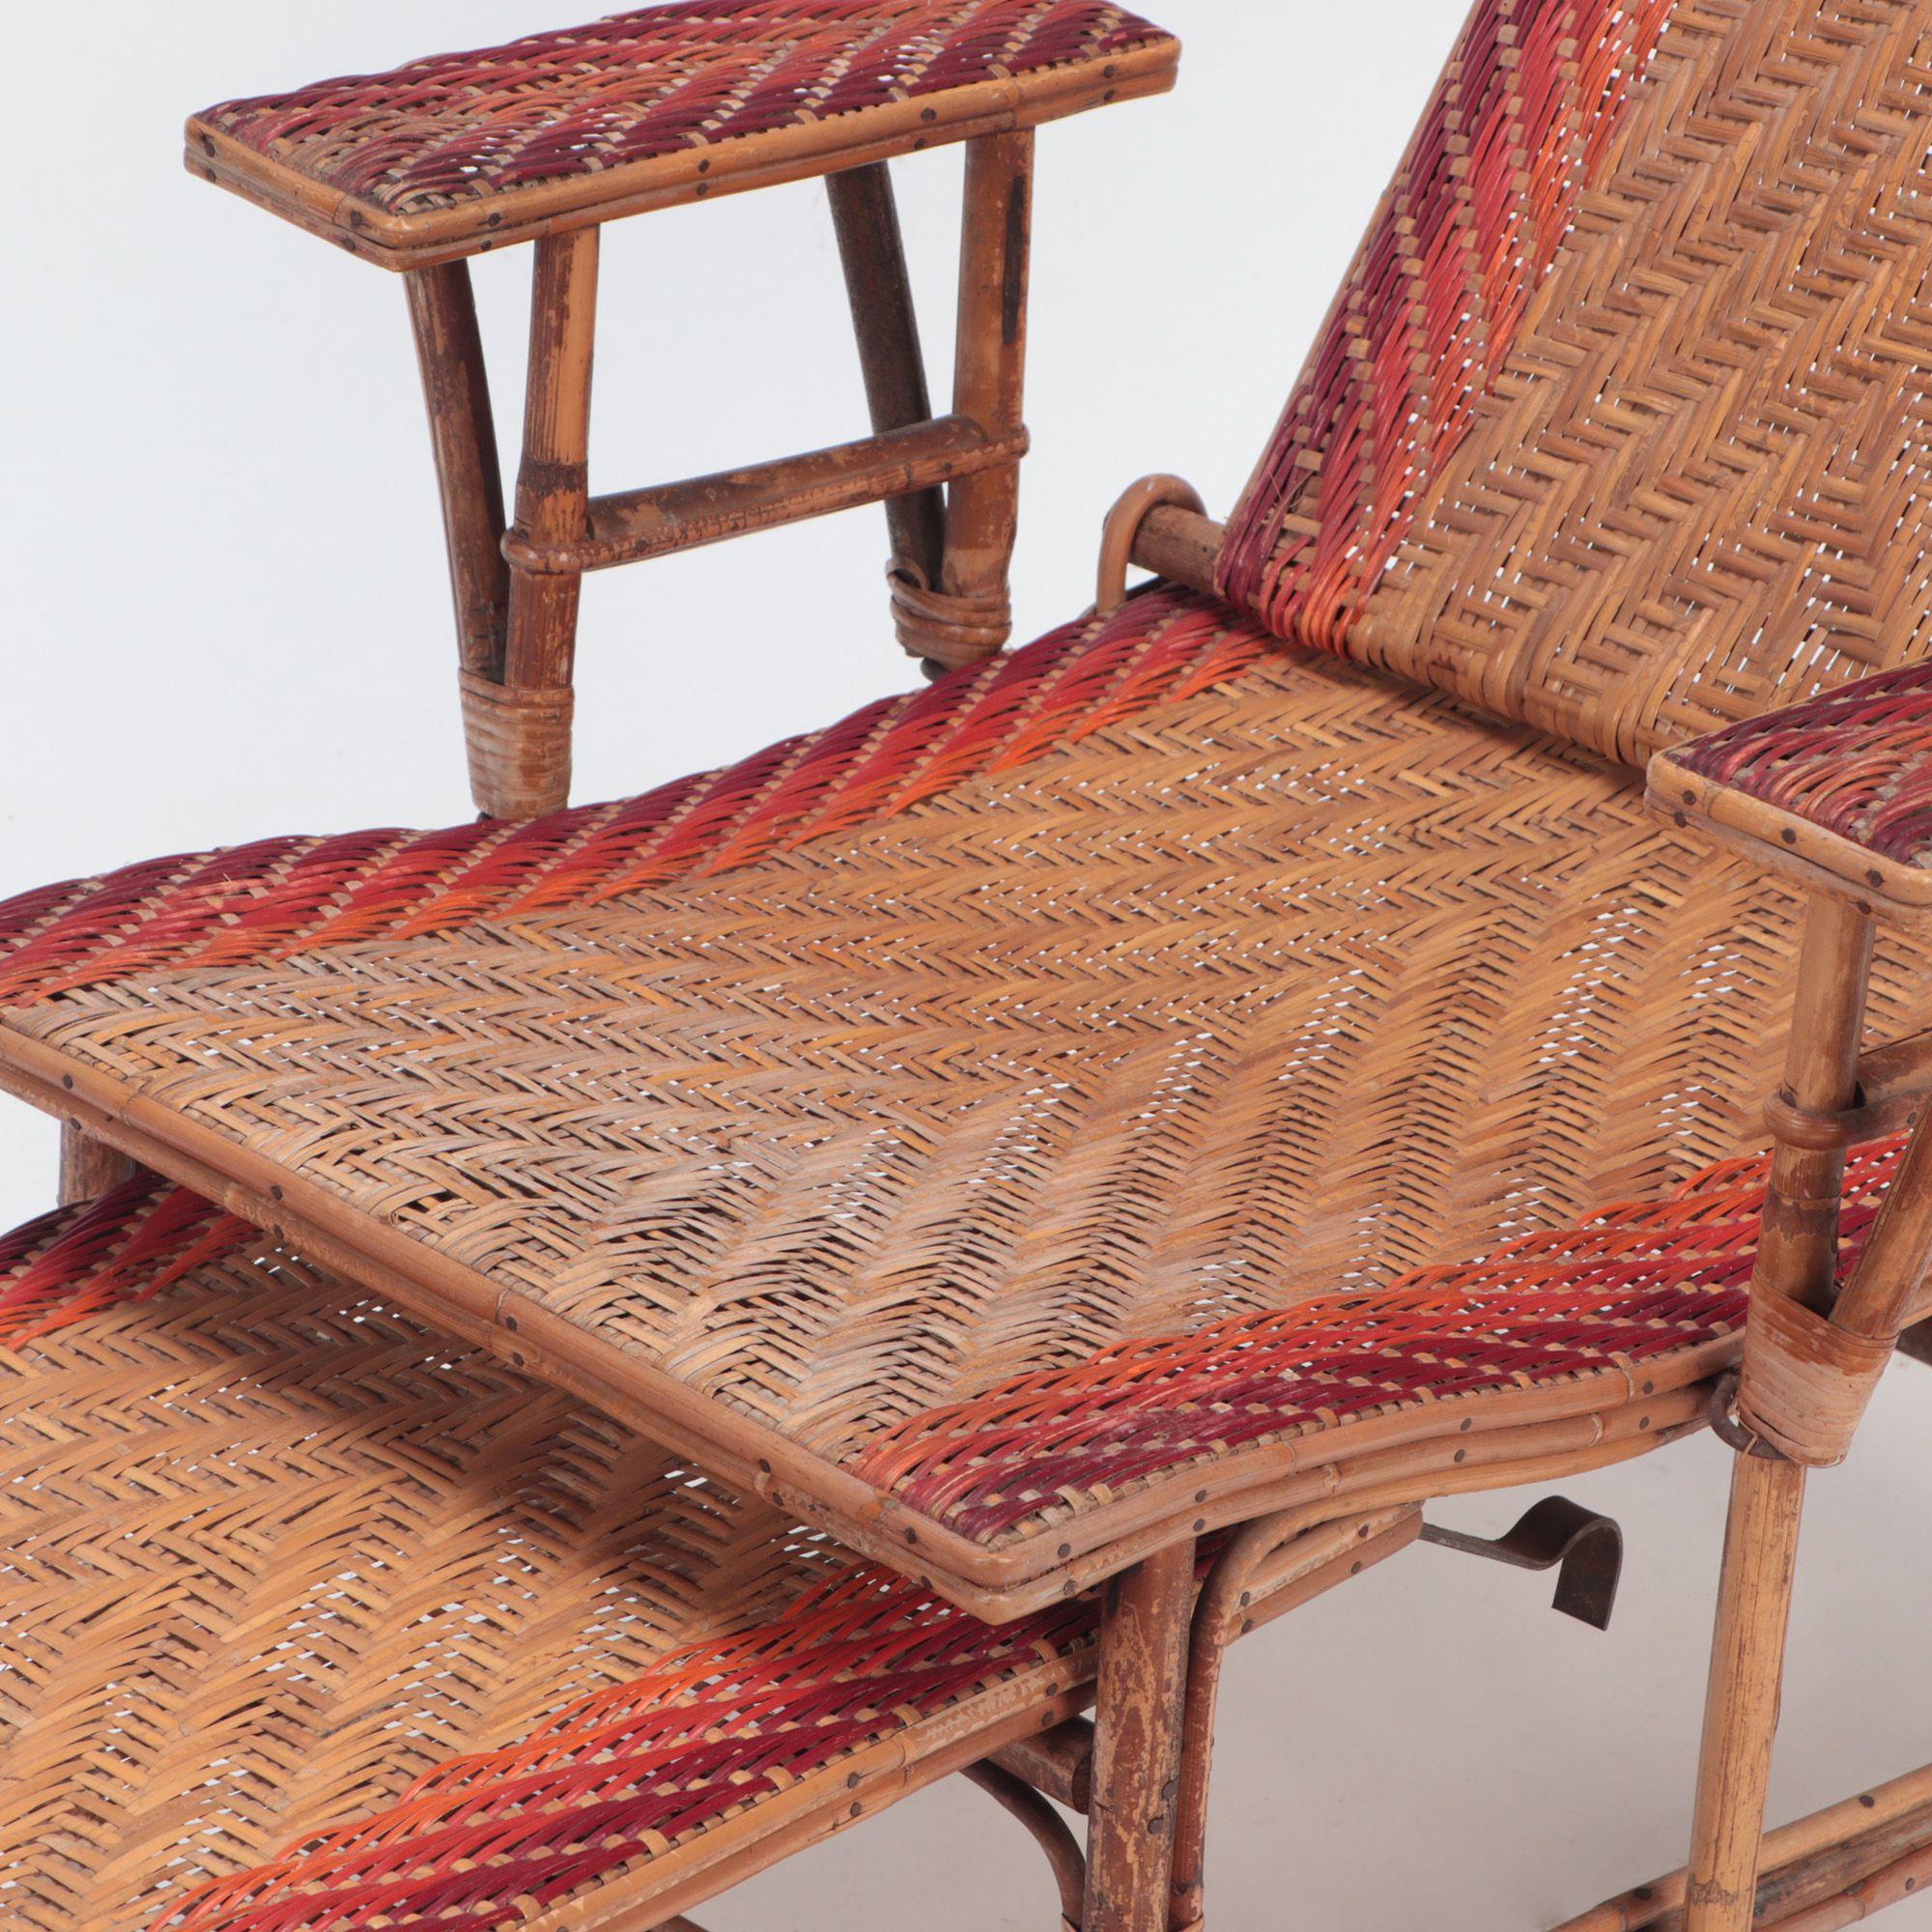 Early 20th Century French Rattan Chaise Longue with Orange and Red Stripes, circa 1900 For Sale